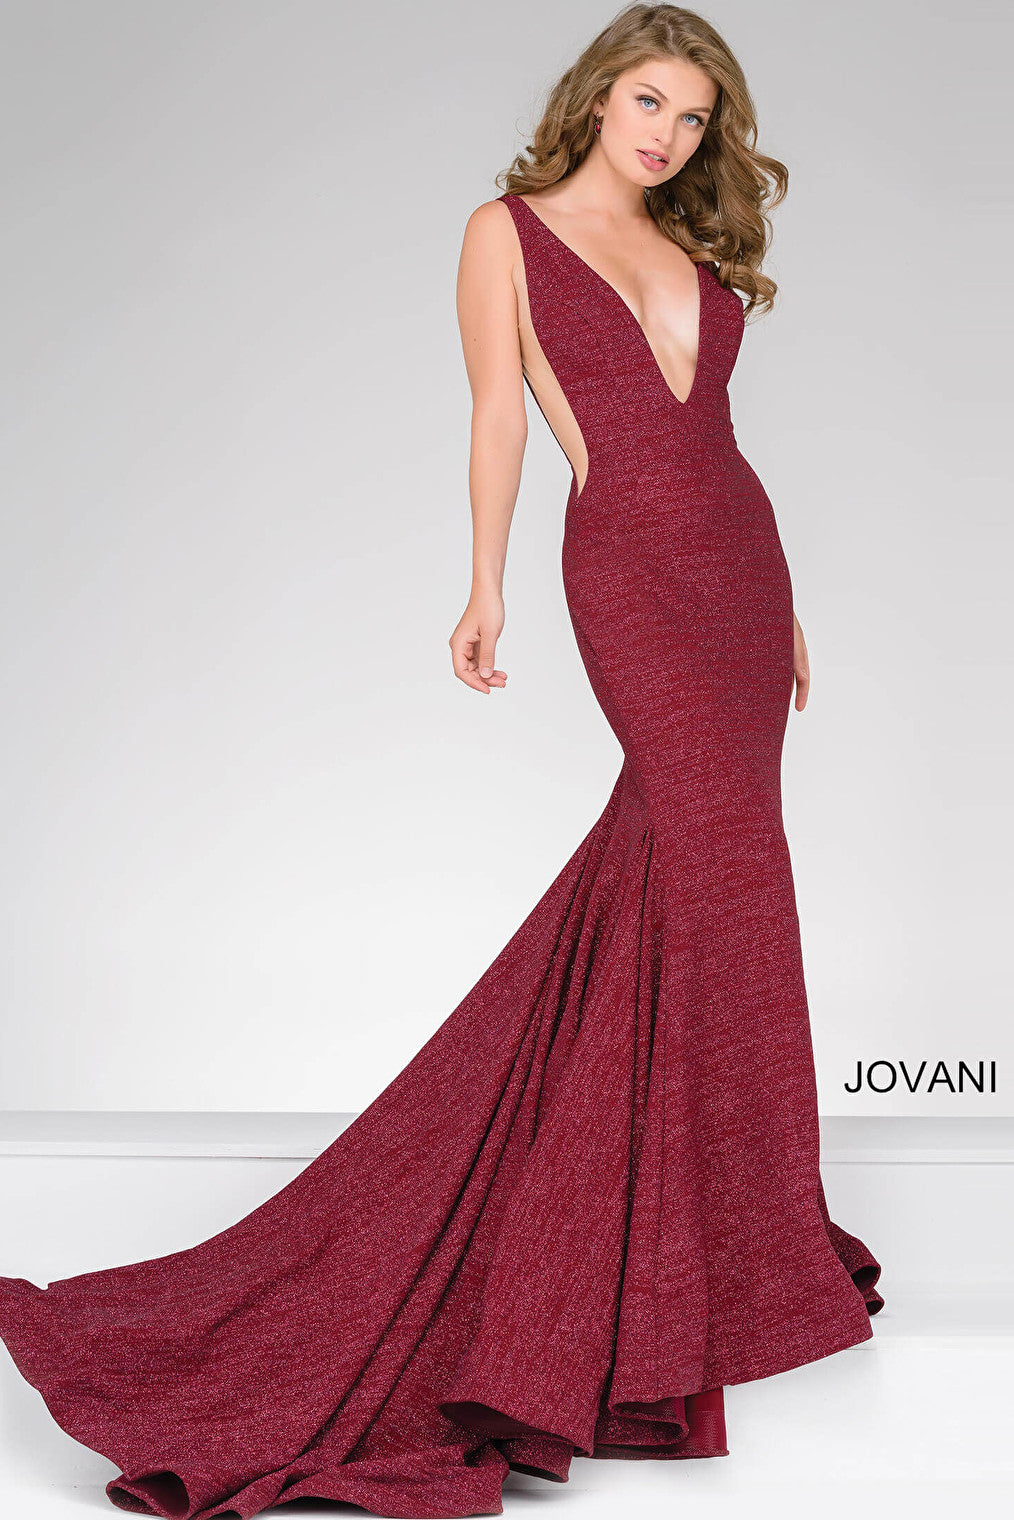 wine low v neckline long train prom gown 47075